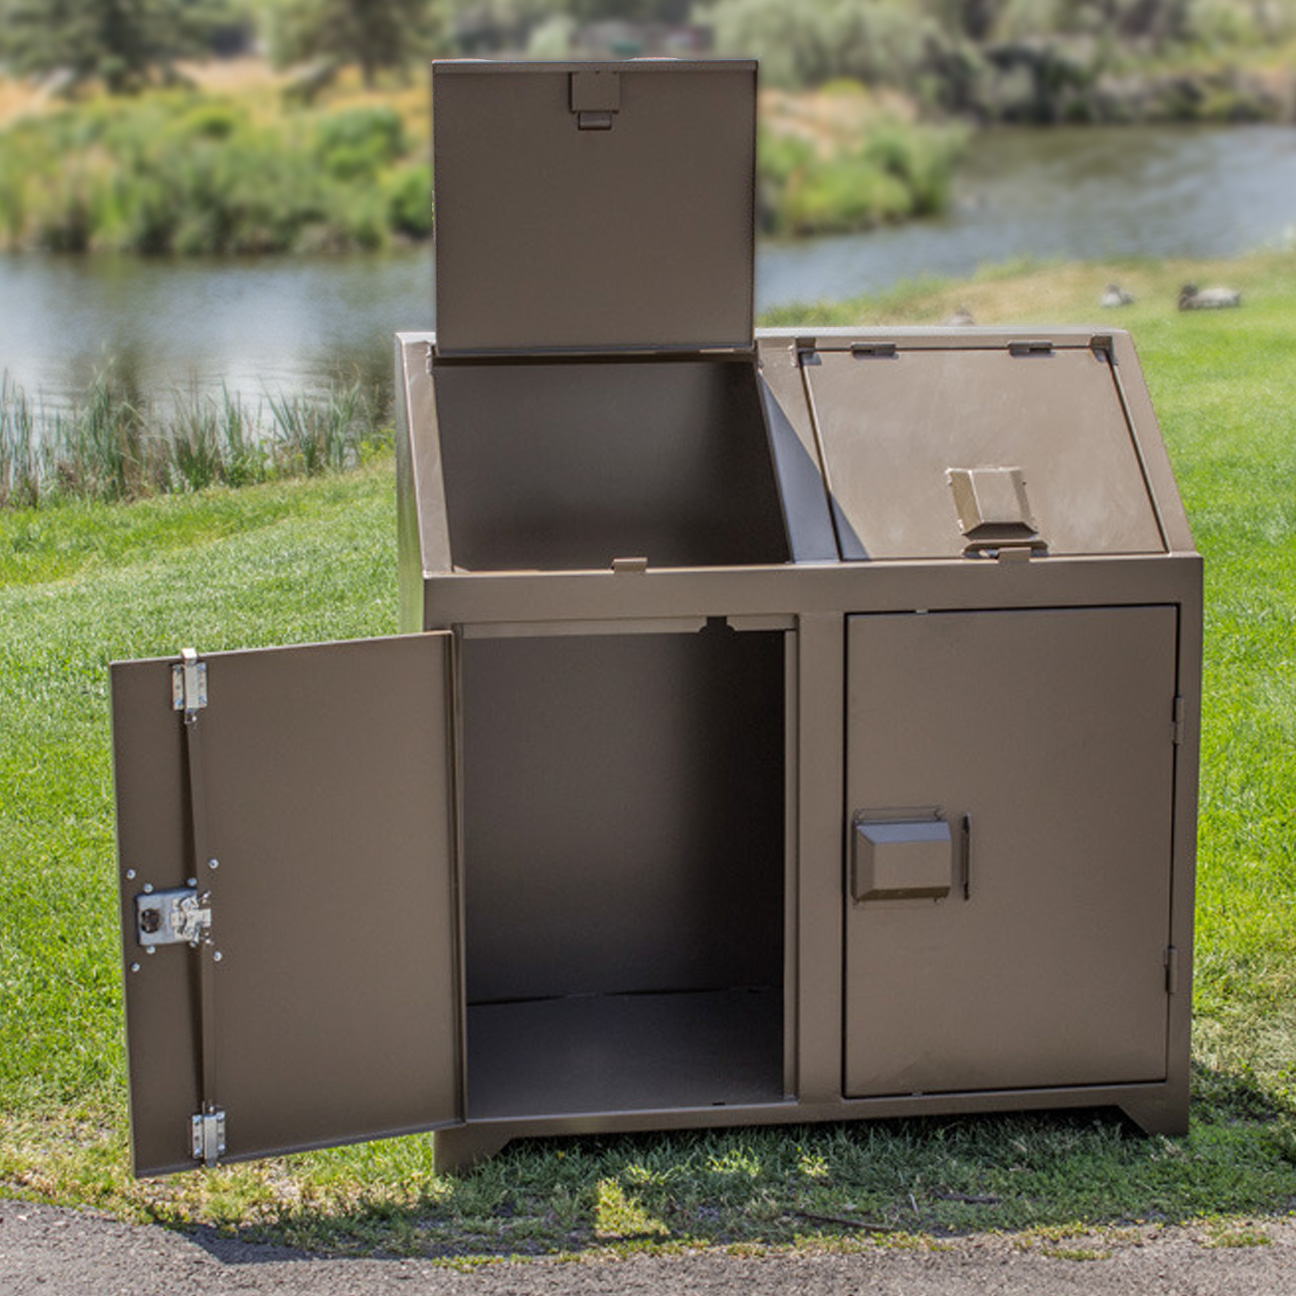 Rodent Proof Outdoor Storage Box